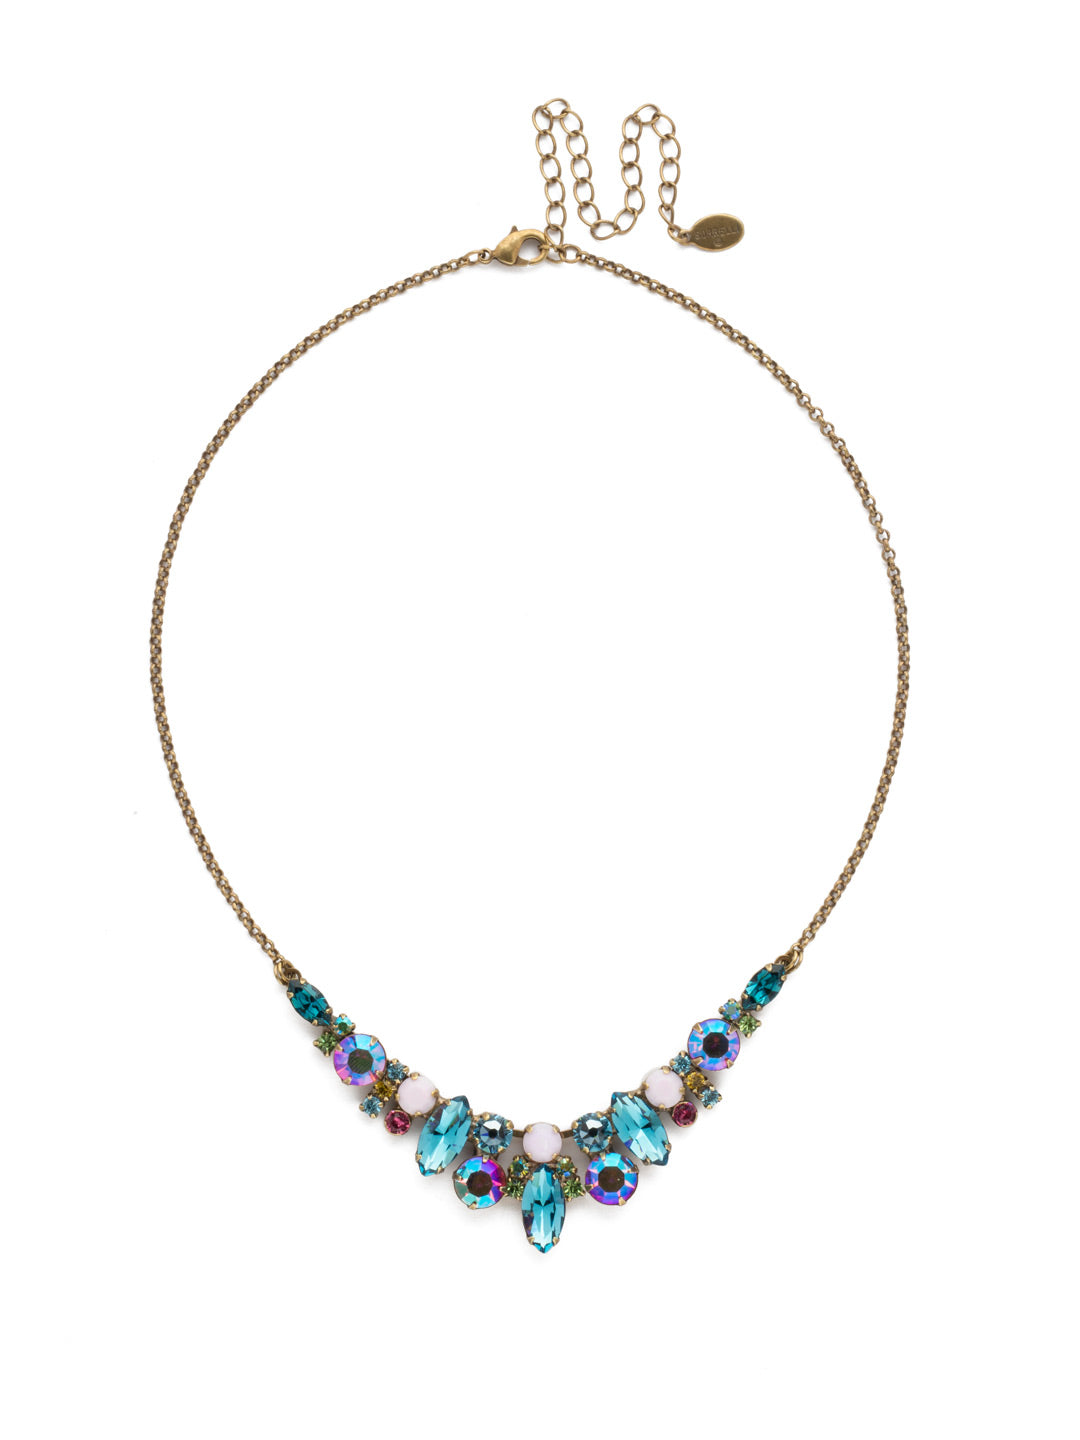 Noveau Navette Statement Necklace - NDG90AGHB